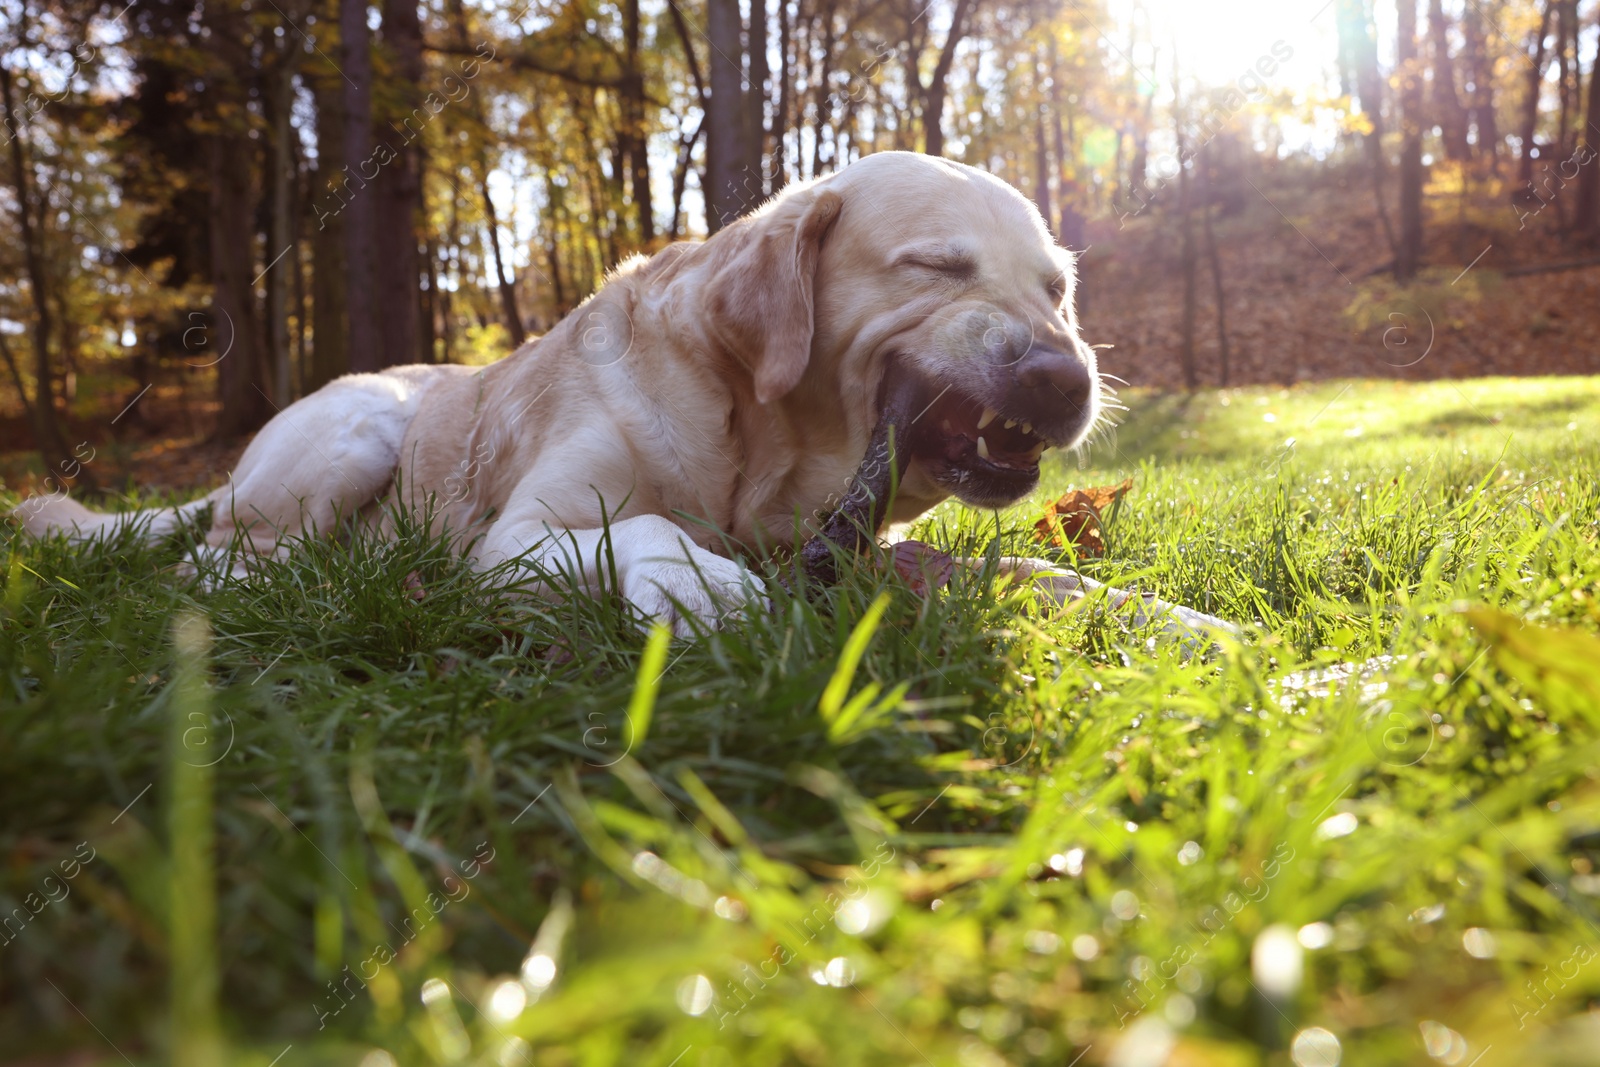 Photo of Cute Labrador Retriever dog playing with stick on green grass in sunny autumn park